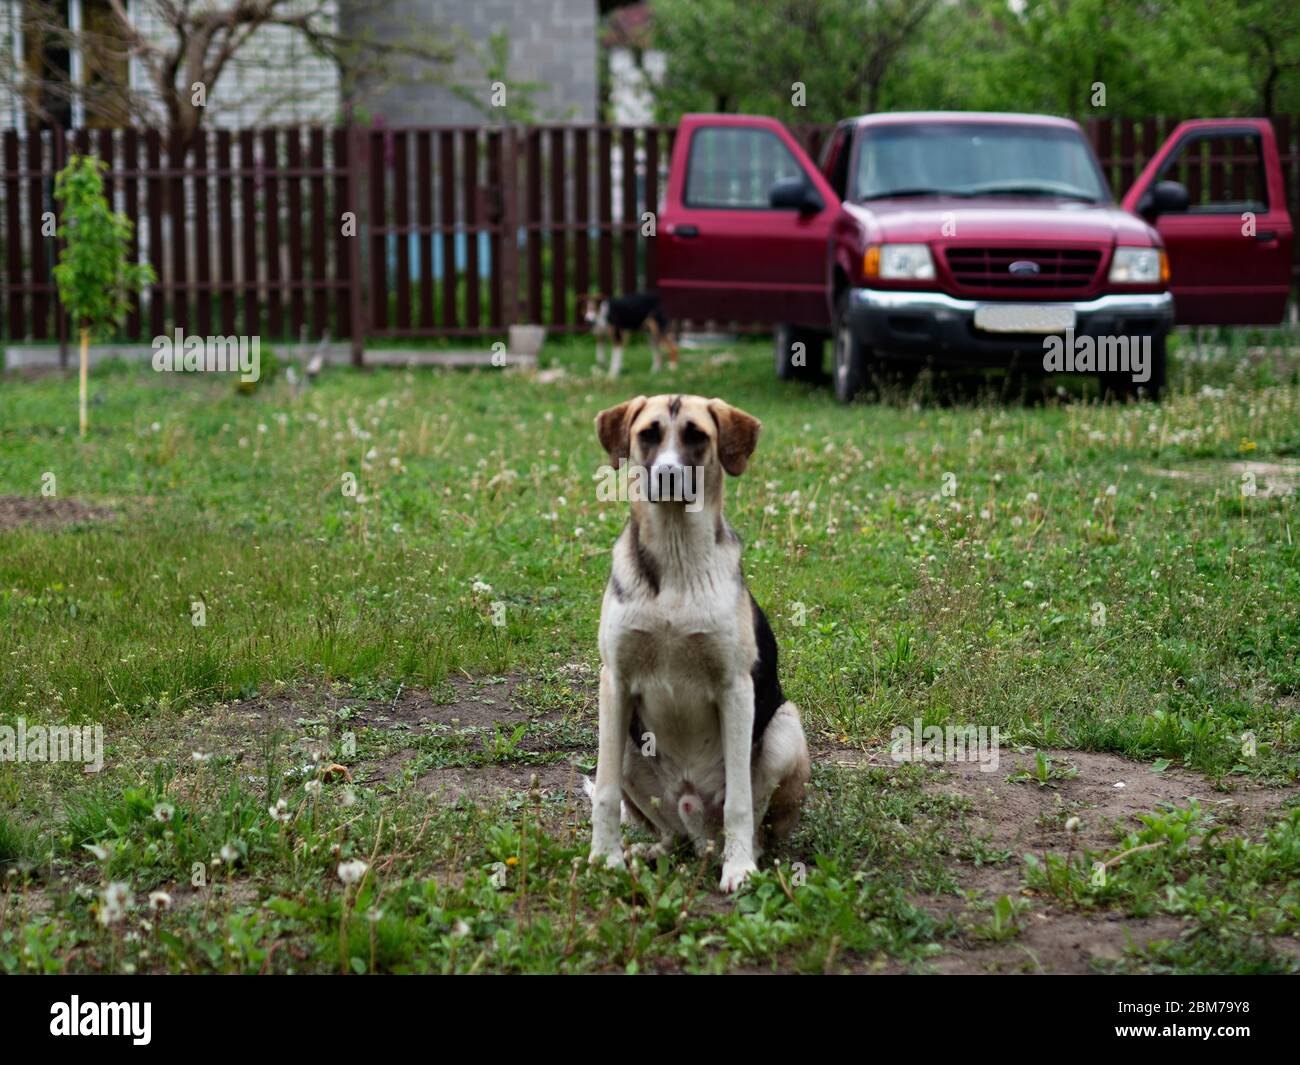 Young dog sits on the lawn of a village house amid a fence and a pickup truck Stock Photo